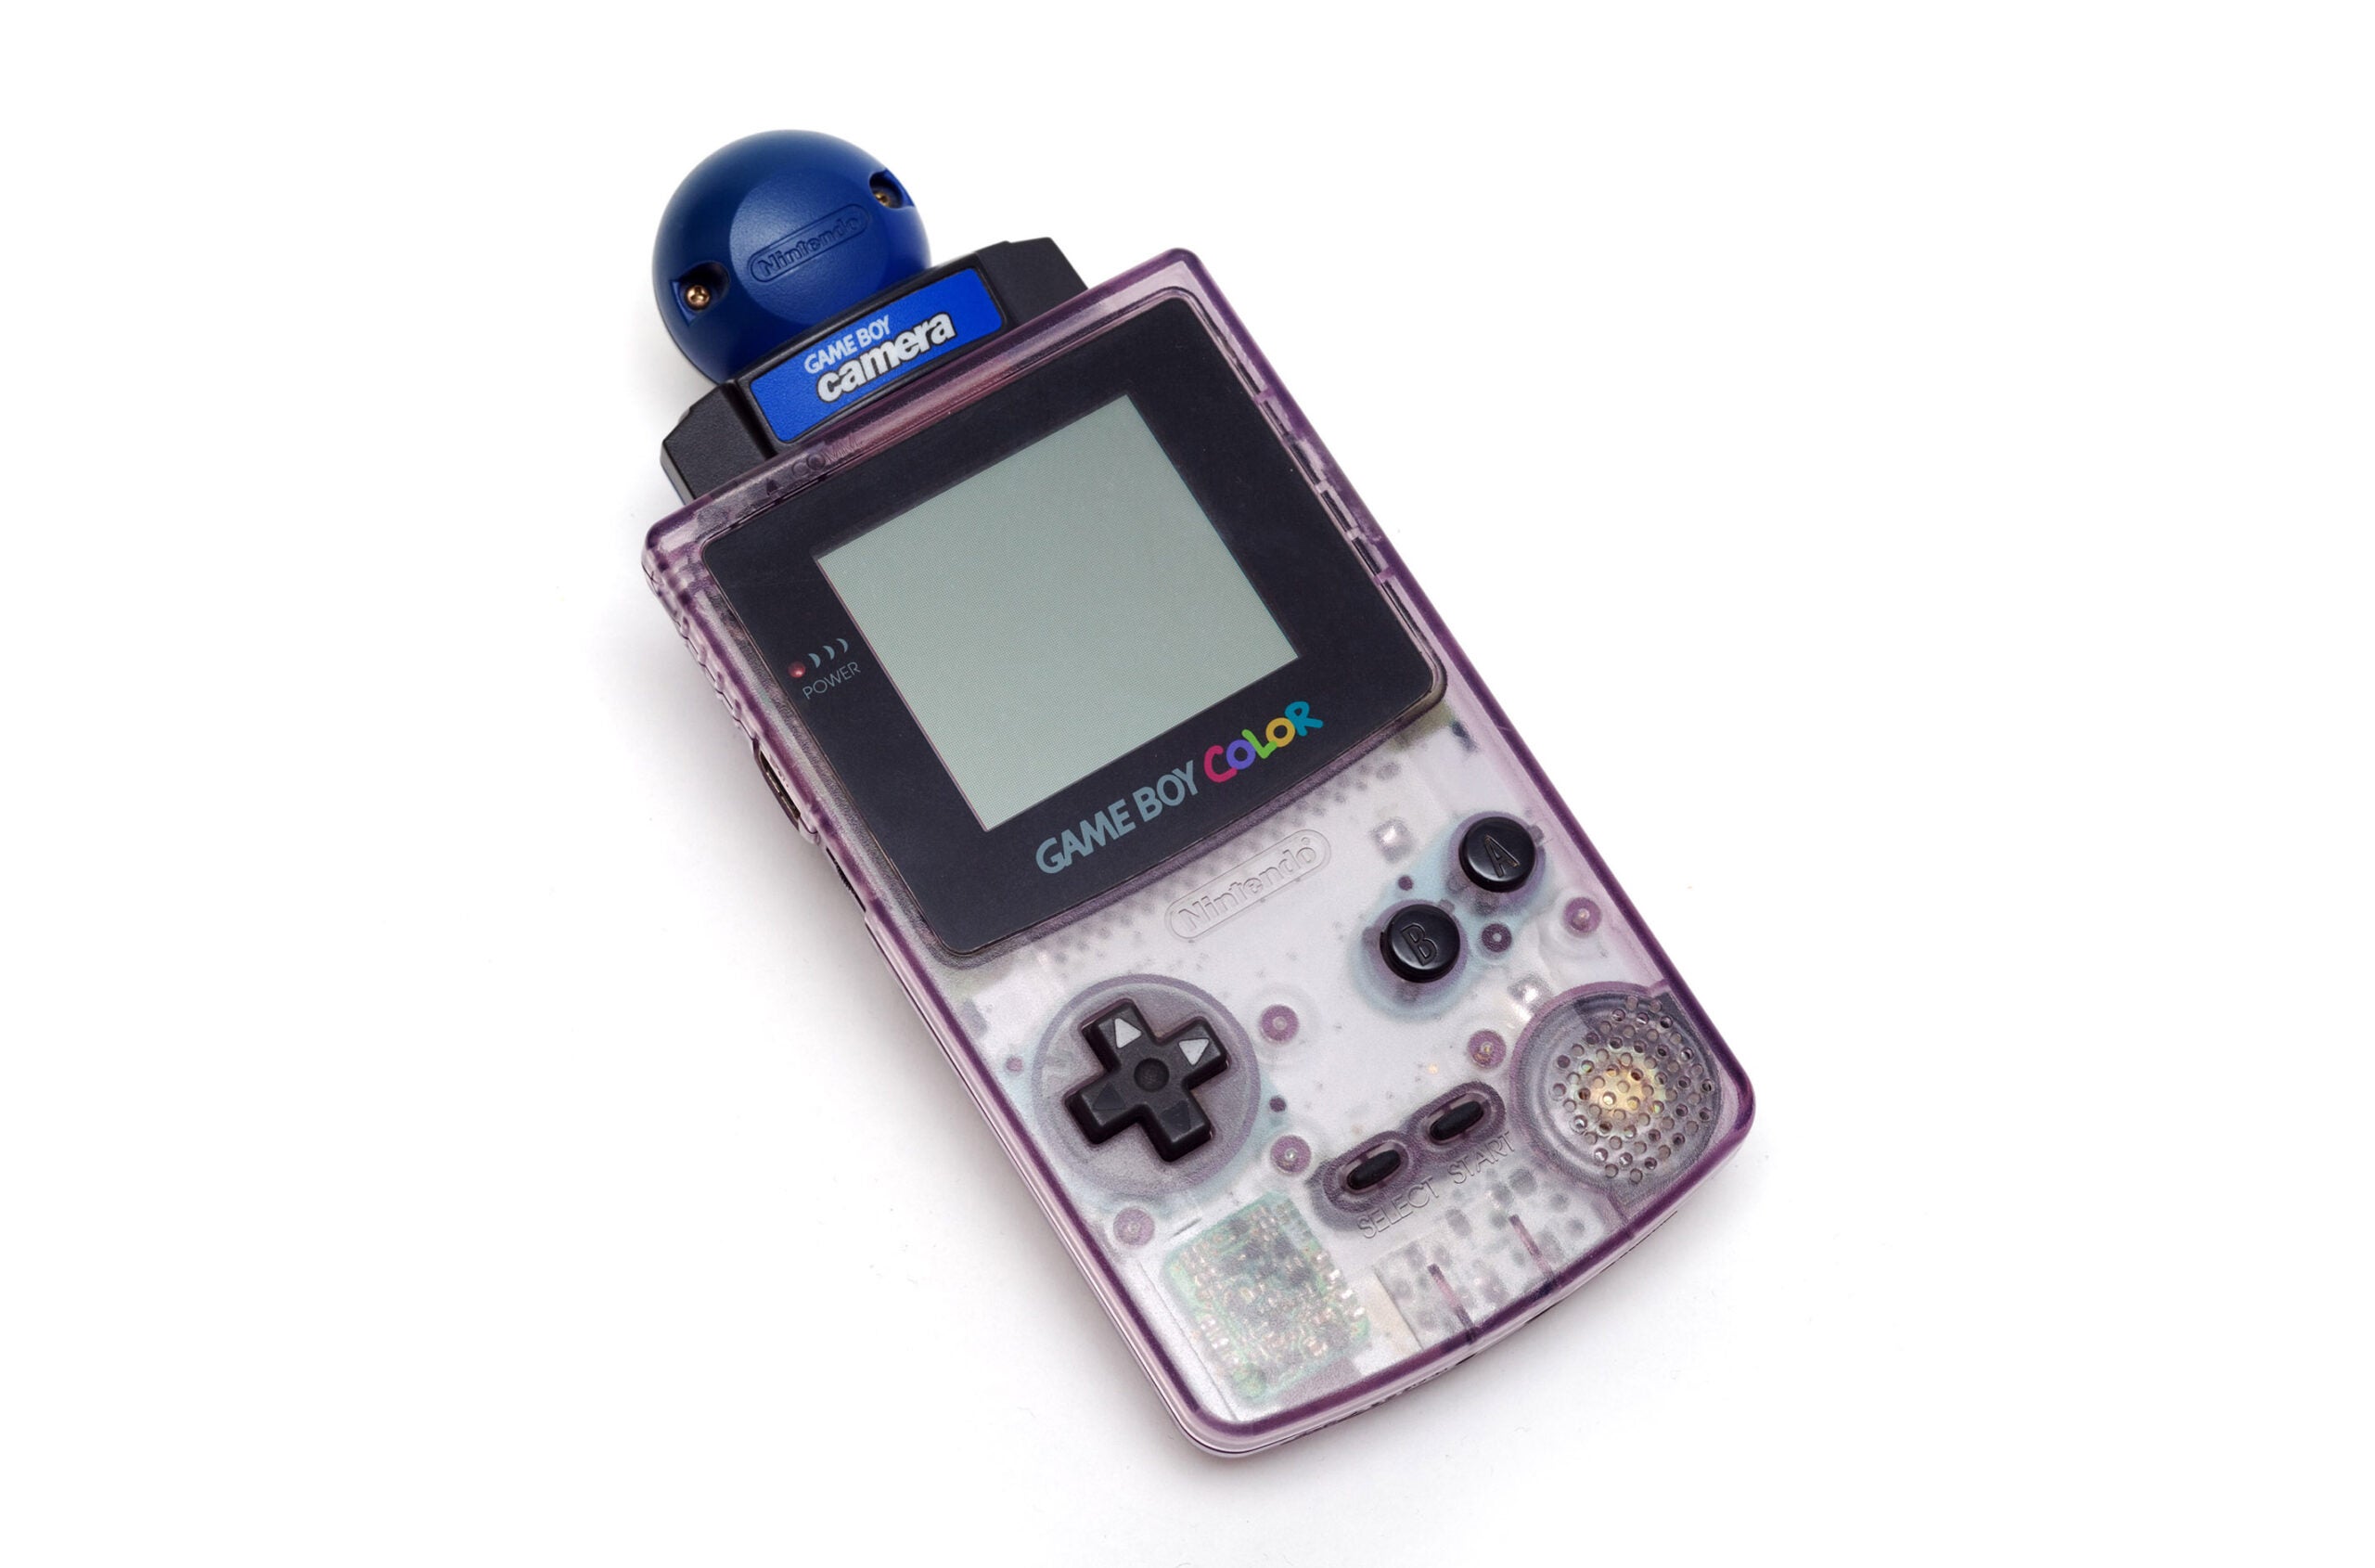 The Gameboy Camera paired with a translucent Gameboy Color.